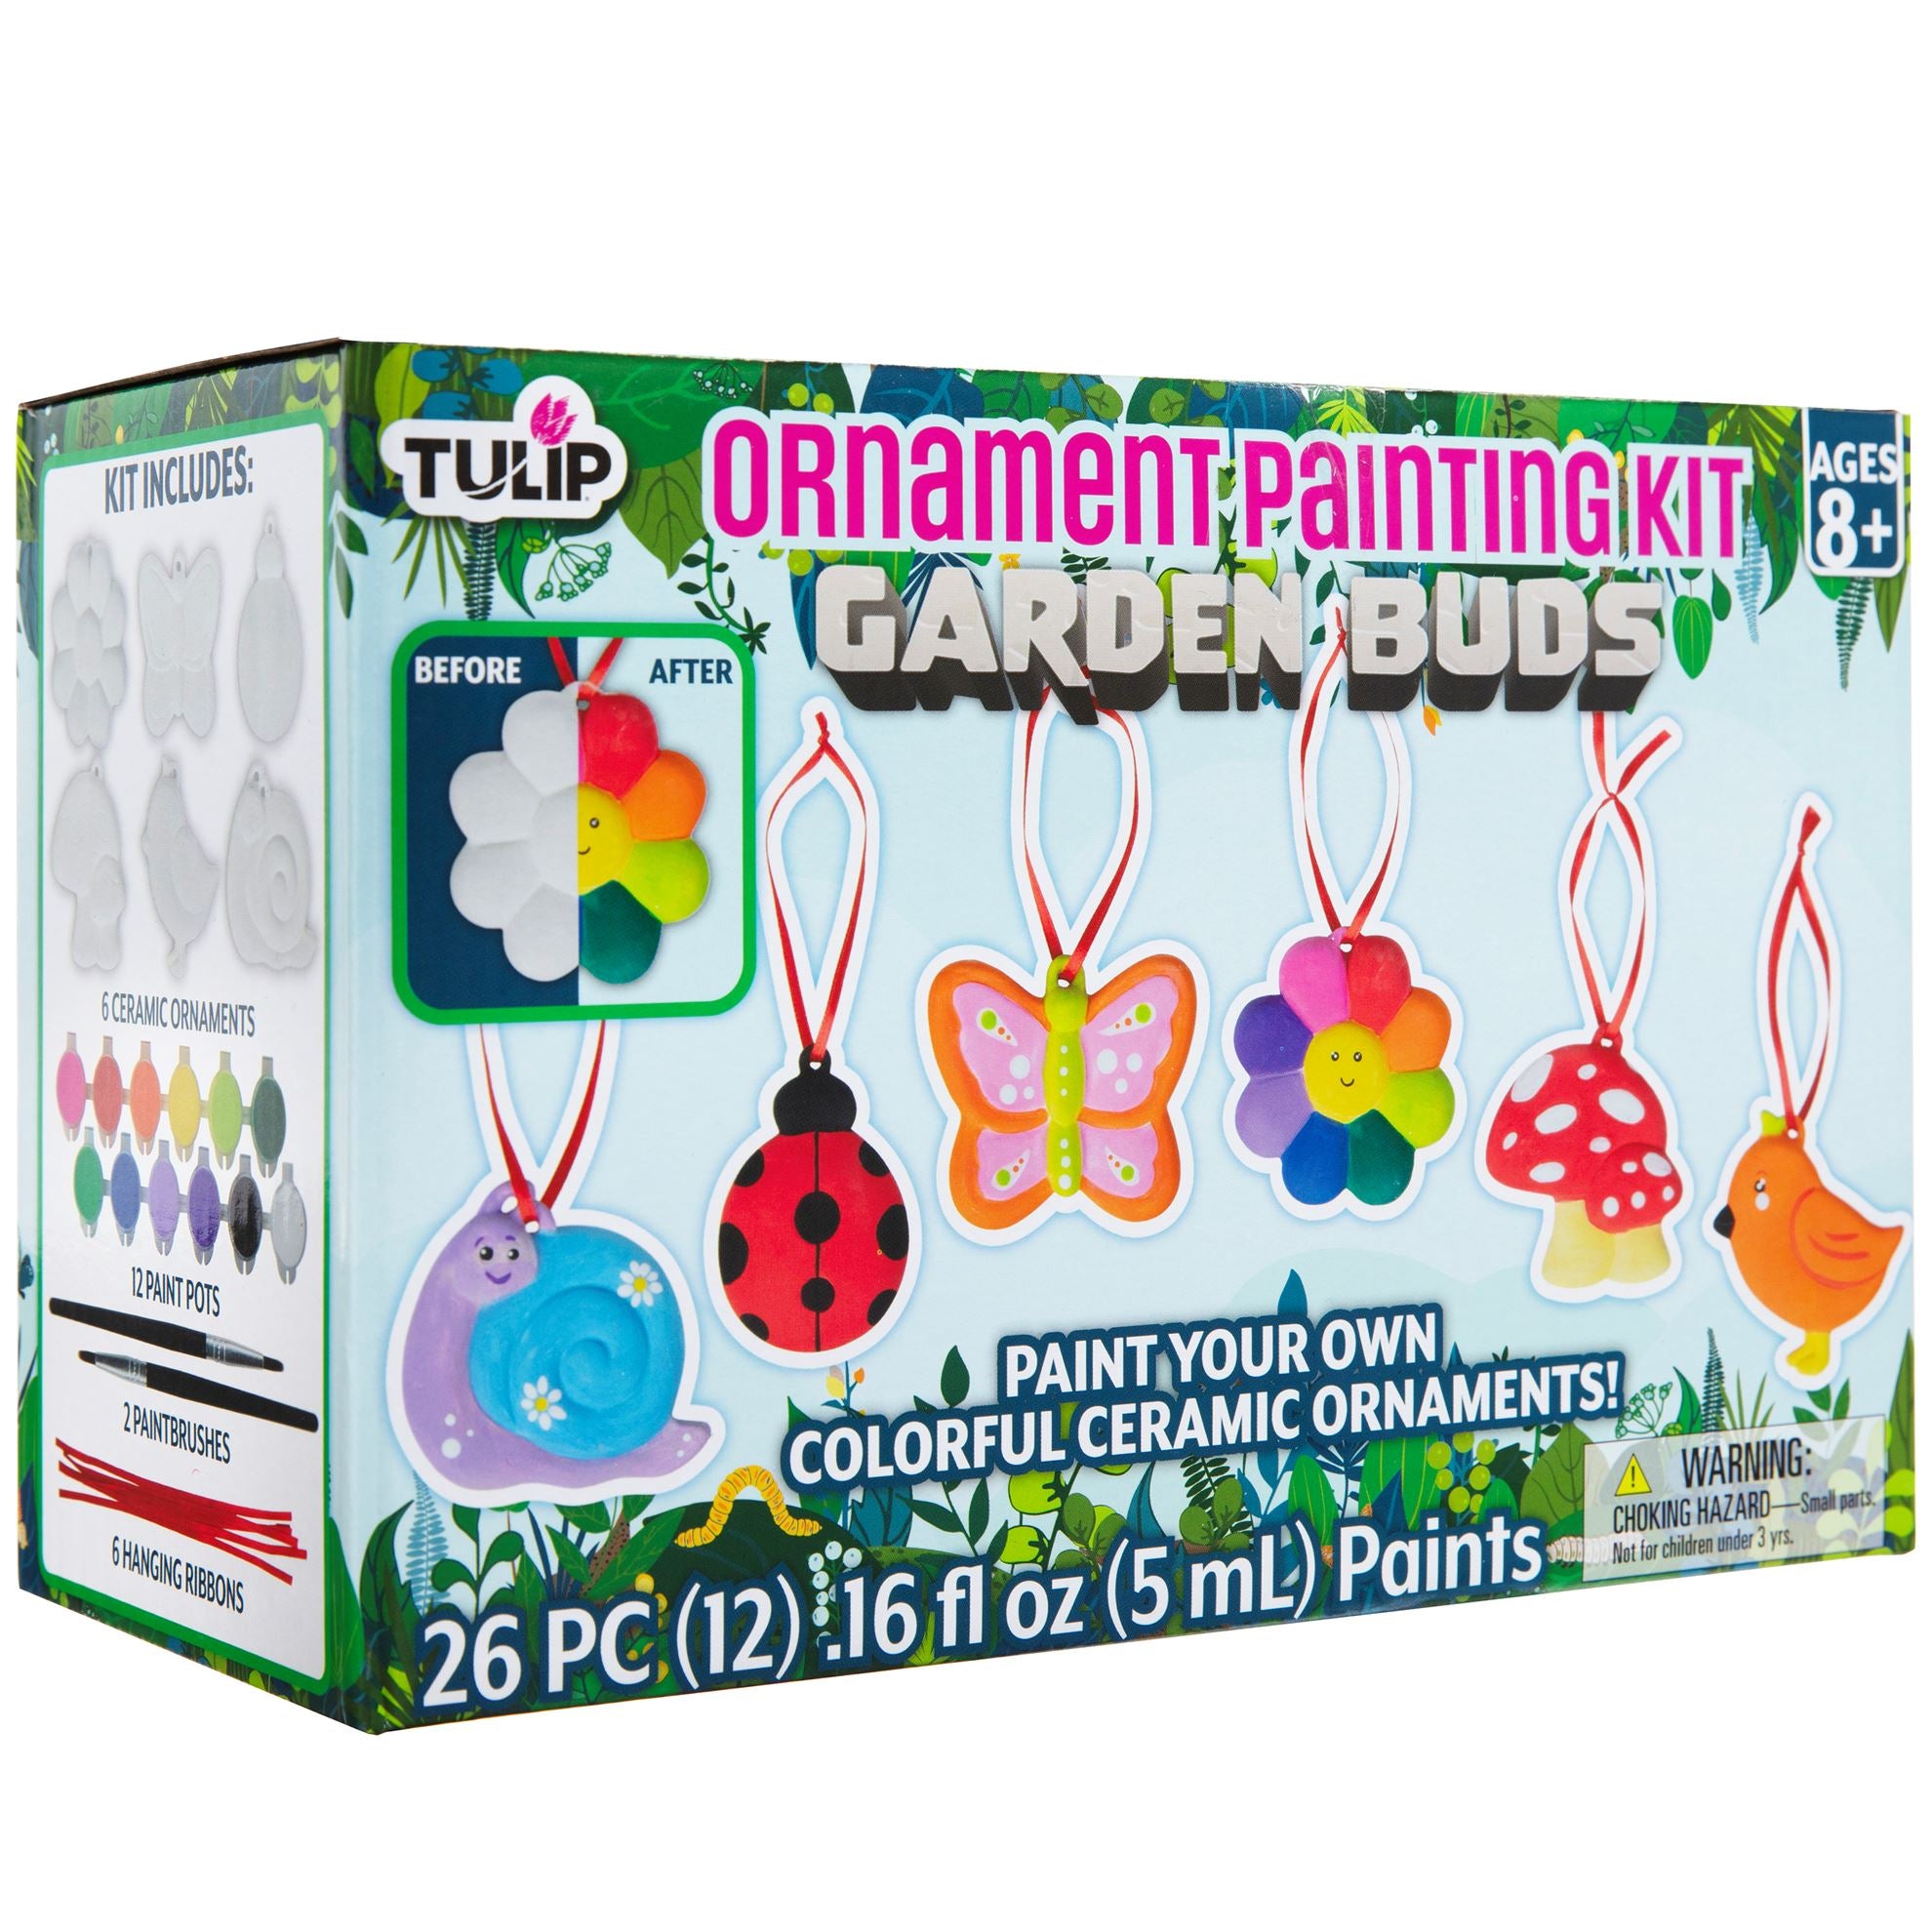 Tulip Color Paint Your Own Garden Ornaments Ceramic Painting Craft Kit for Kids Rainbow Colors